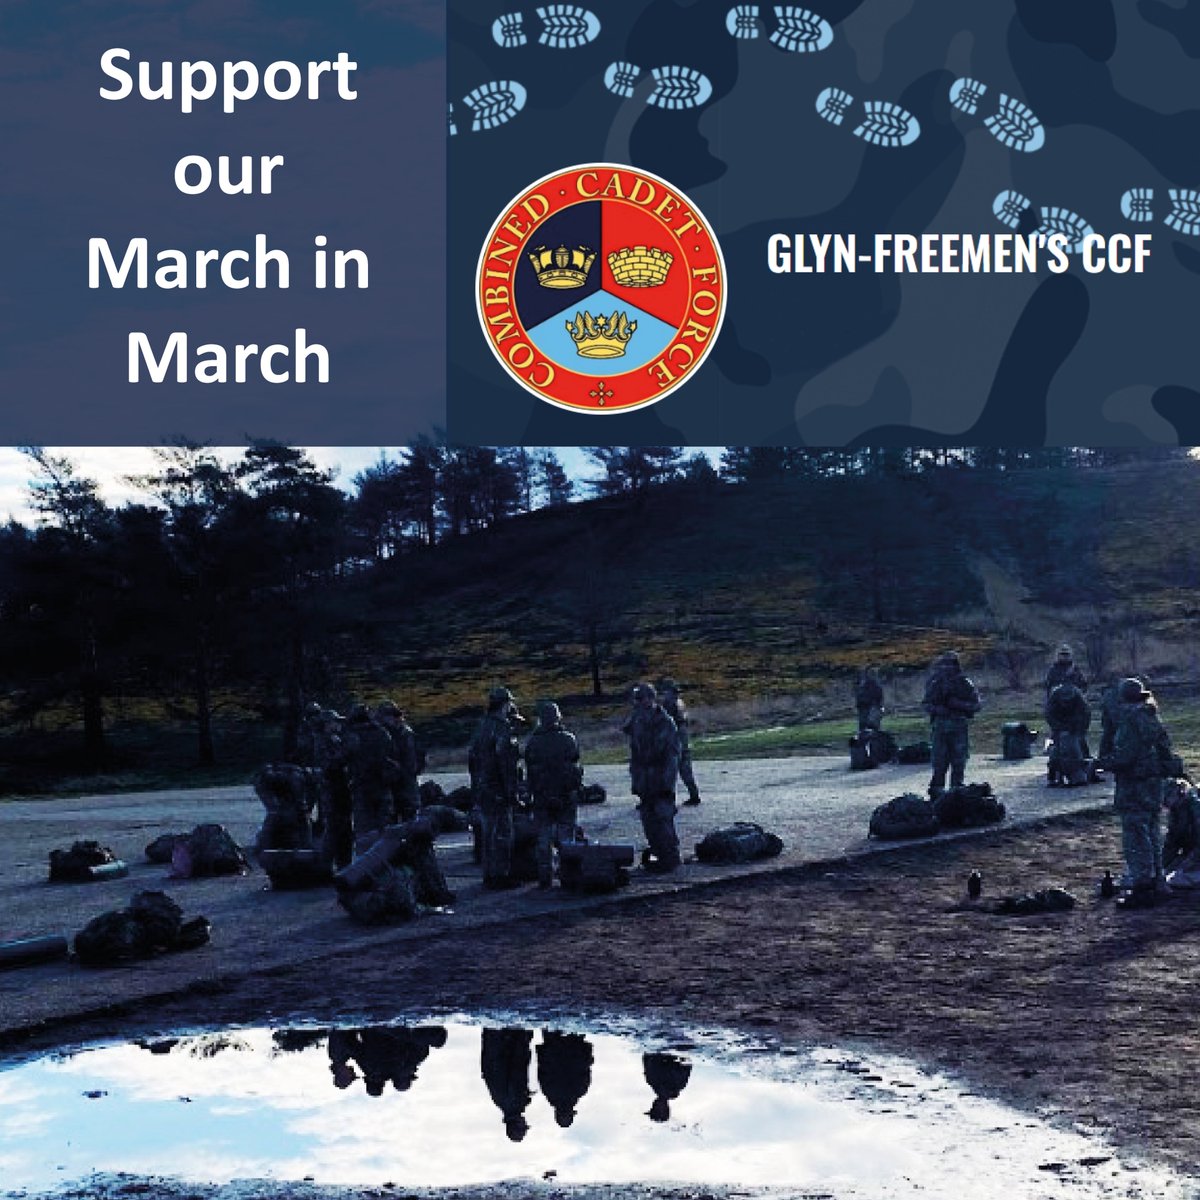 Support our March in March This year we will be taking on March in March to raise vital funds for life-changing mental health treatment for veterans. Link here: events.combatstress.org.uk/fundraiser/Gly… Thank you so much for your support! #mentalhealth #veterans #marchinmarch #support